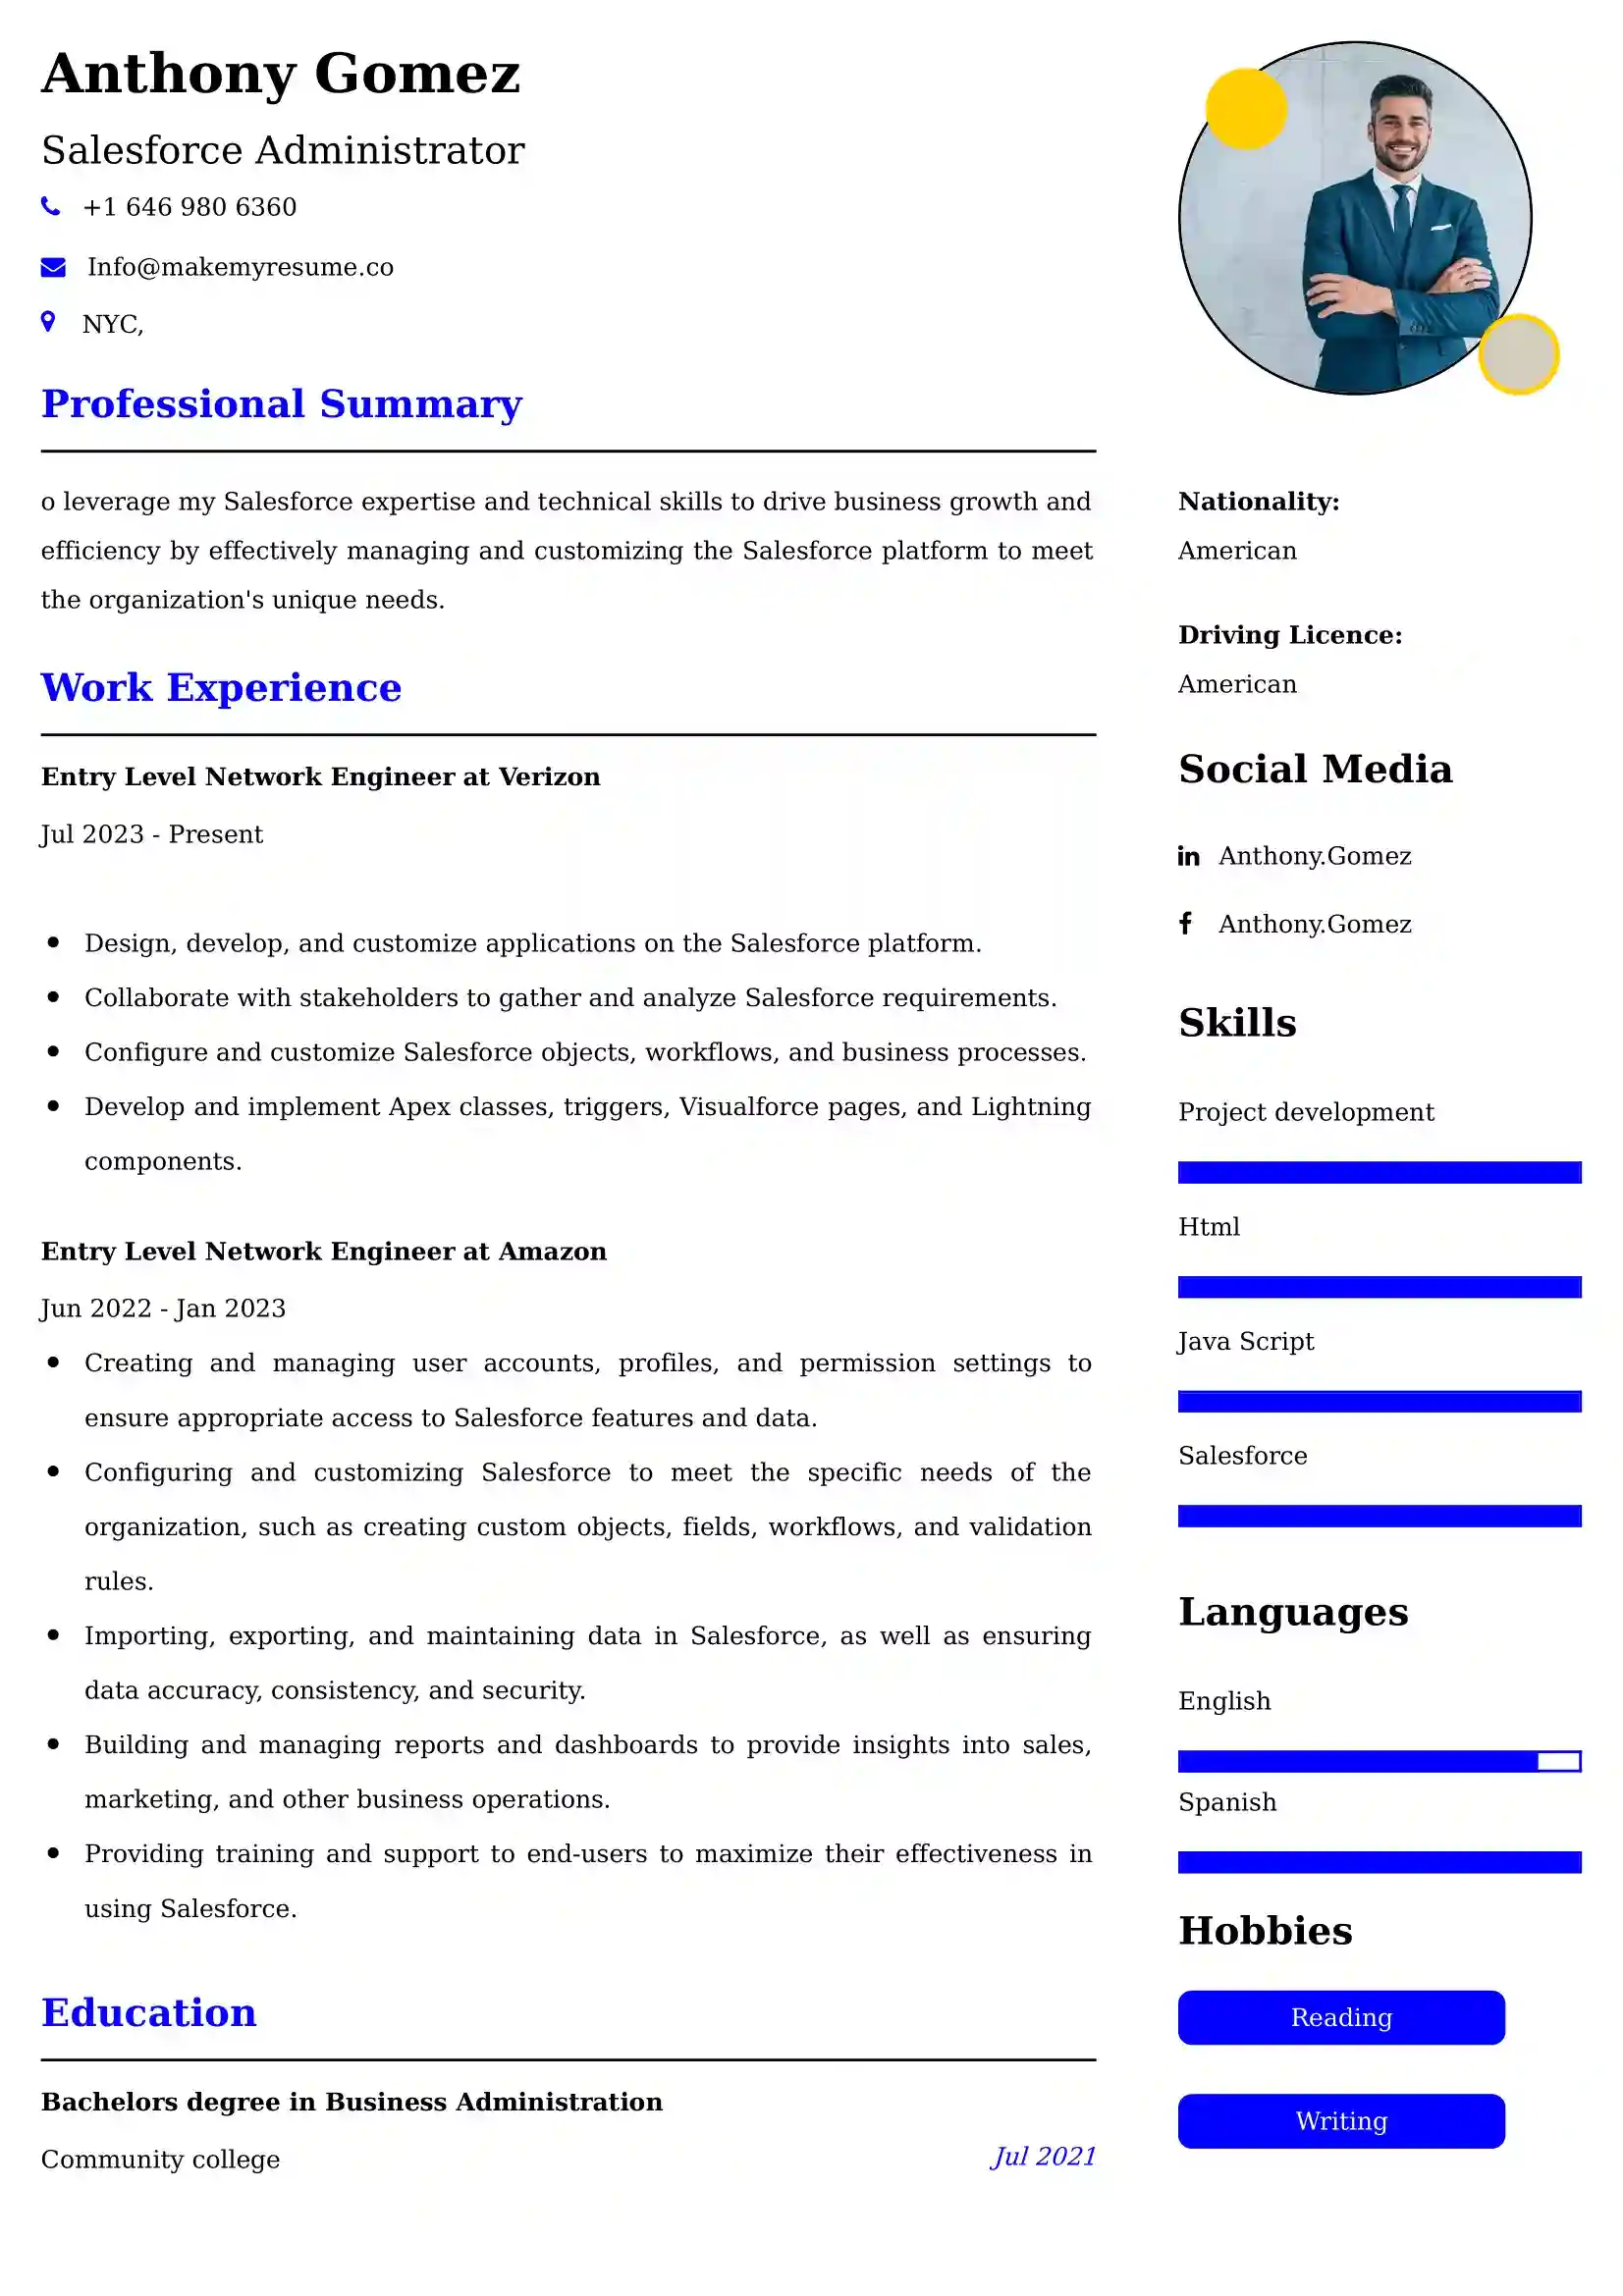 Salesforce Administrator Resume Examples - UAE Format and Tips.